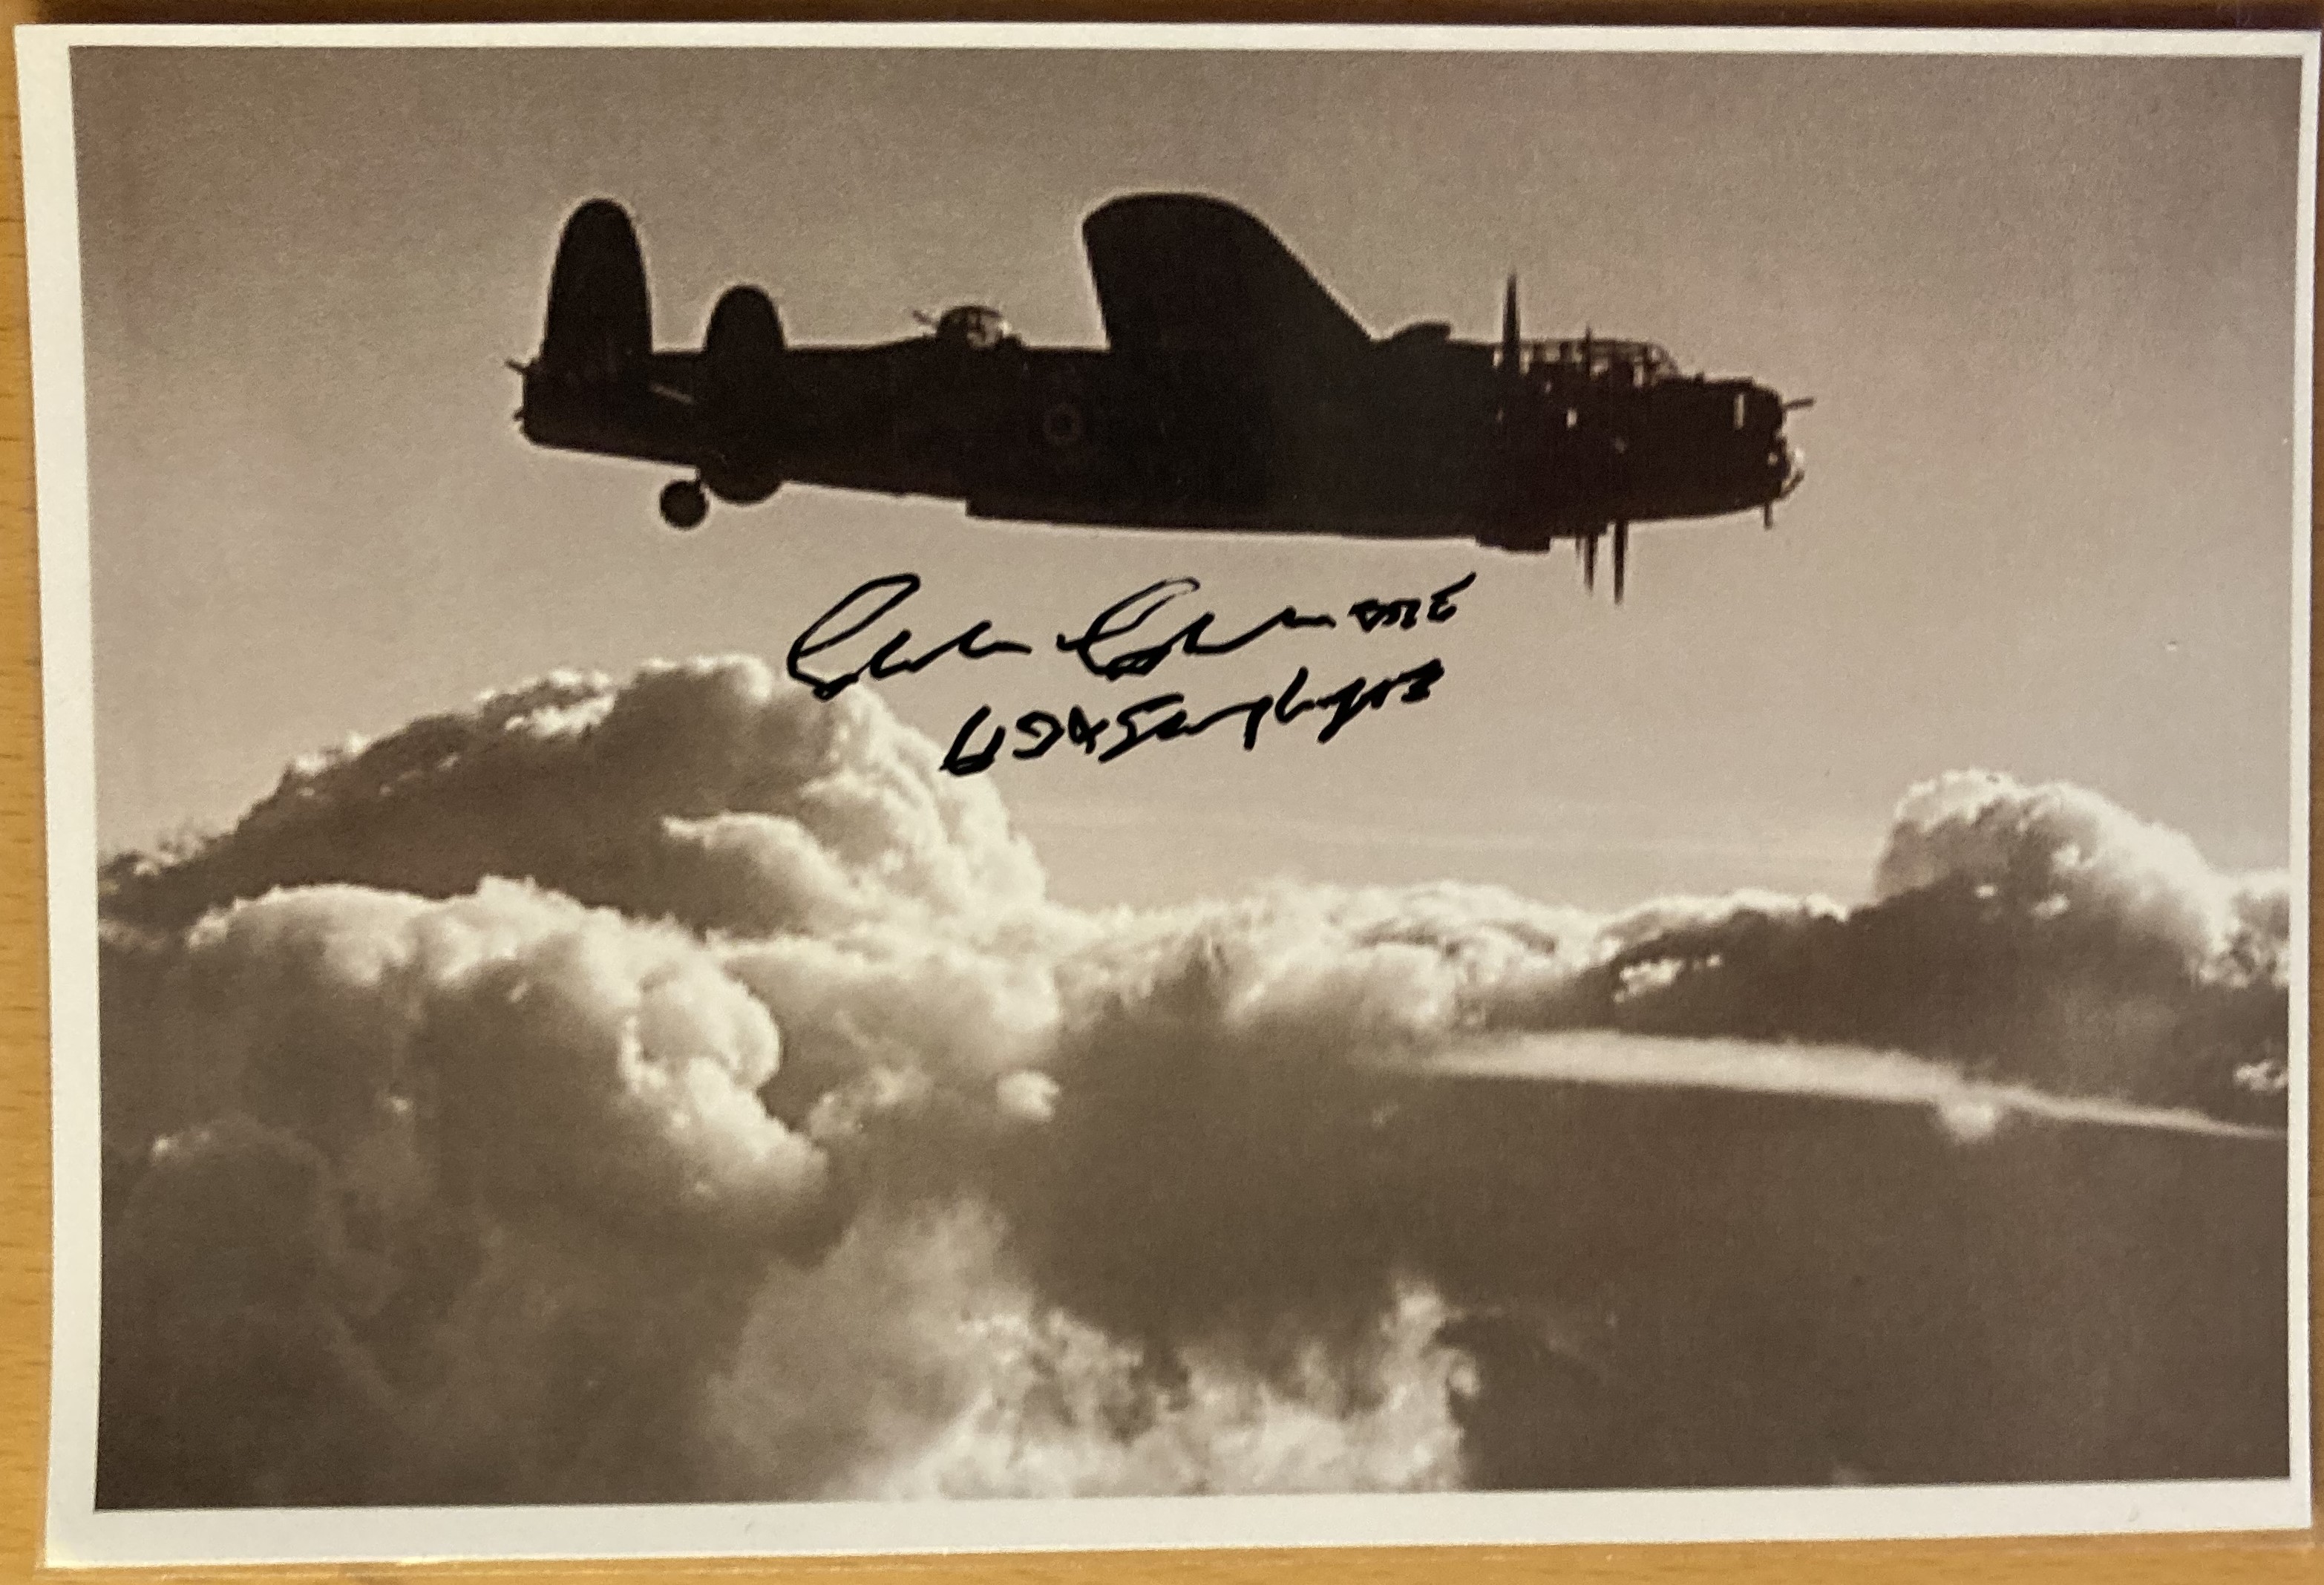 WW2 Air Cde Charles Clark OBE 619 sqn POW Stalag Luft III signed 6 x 4 inch Lancaster in flight